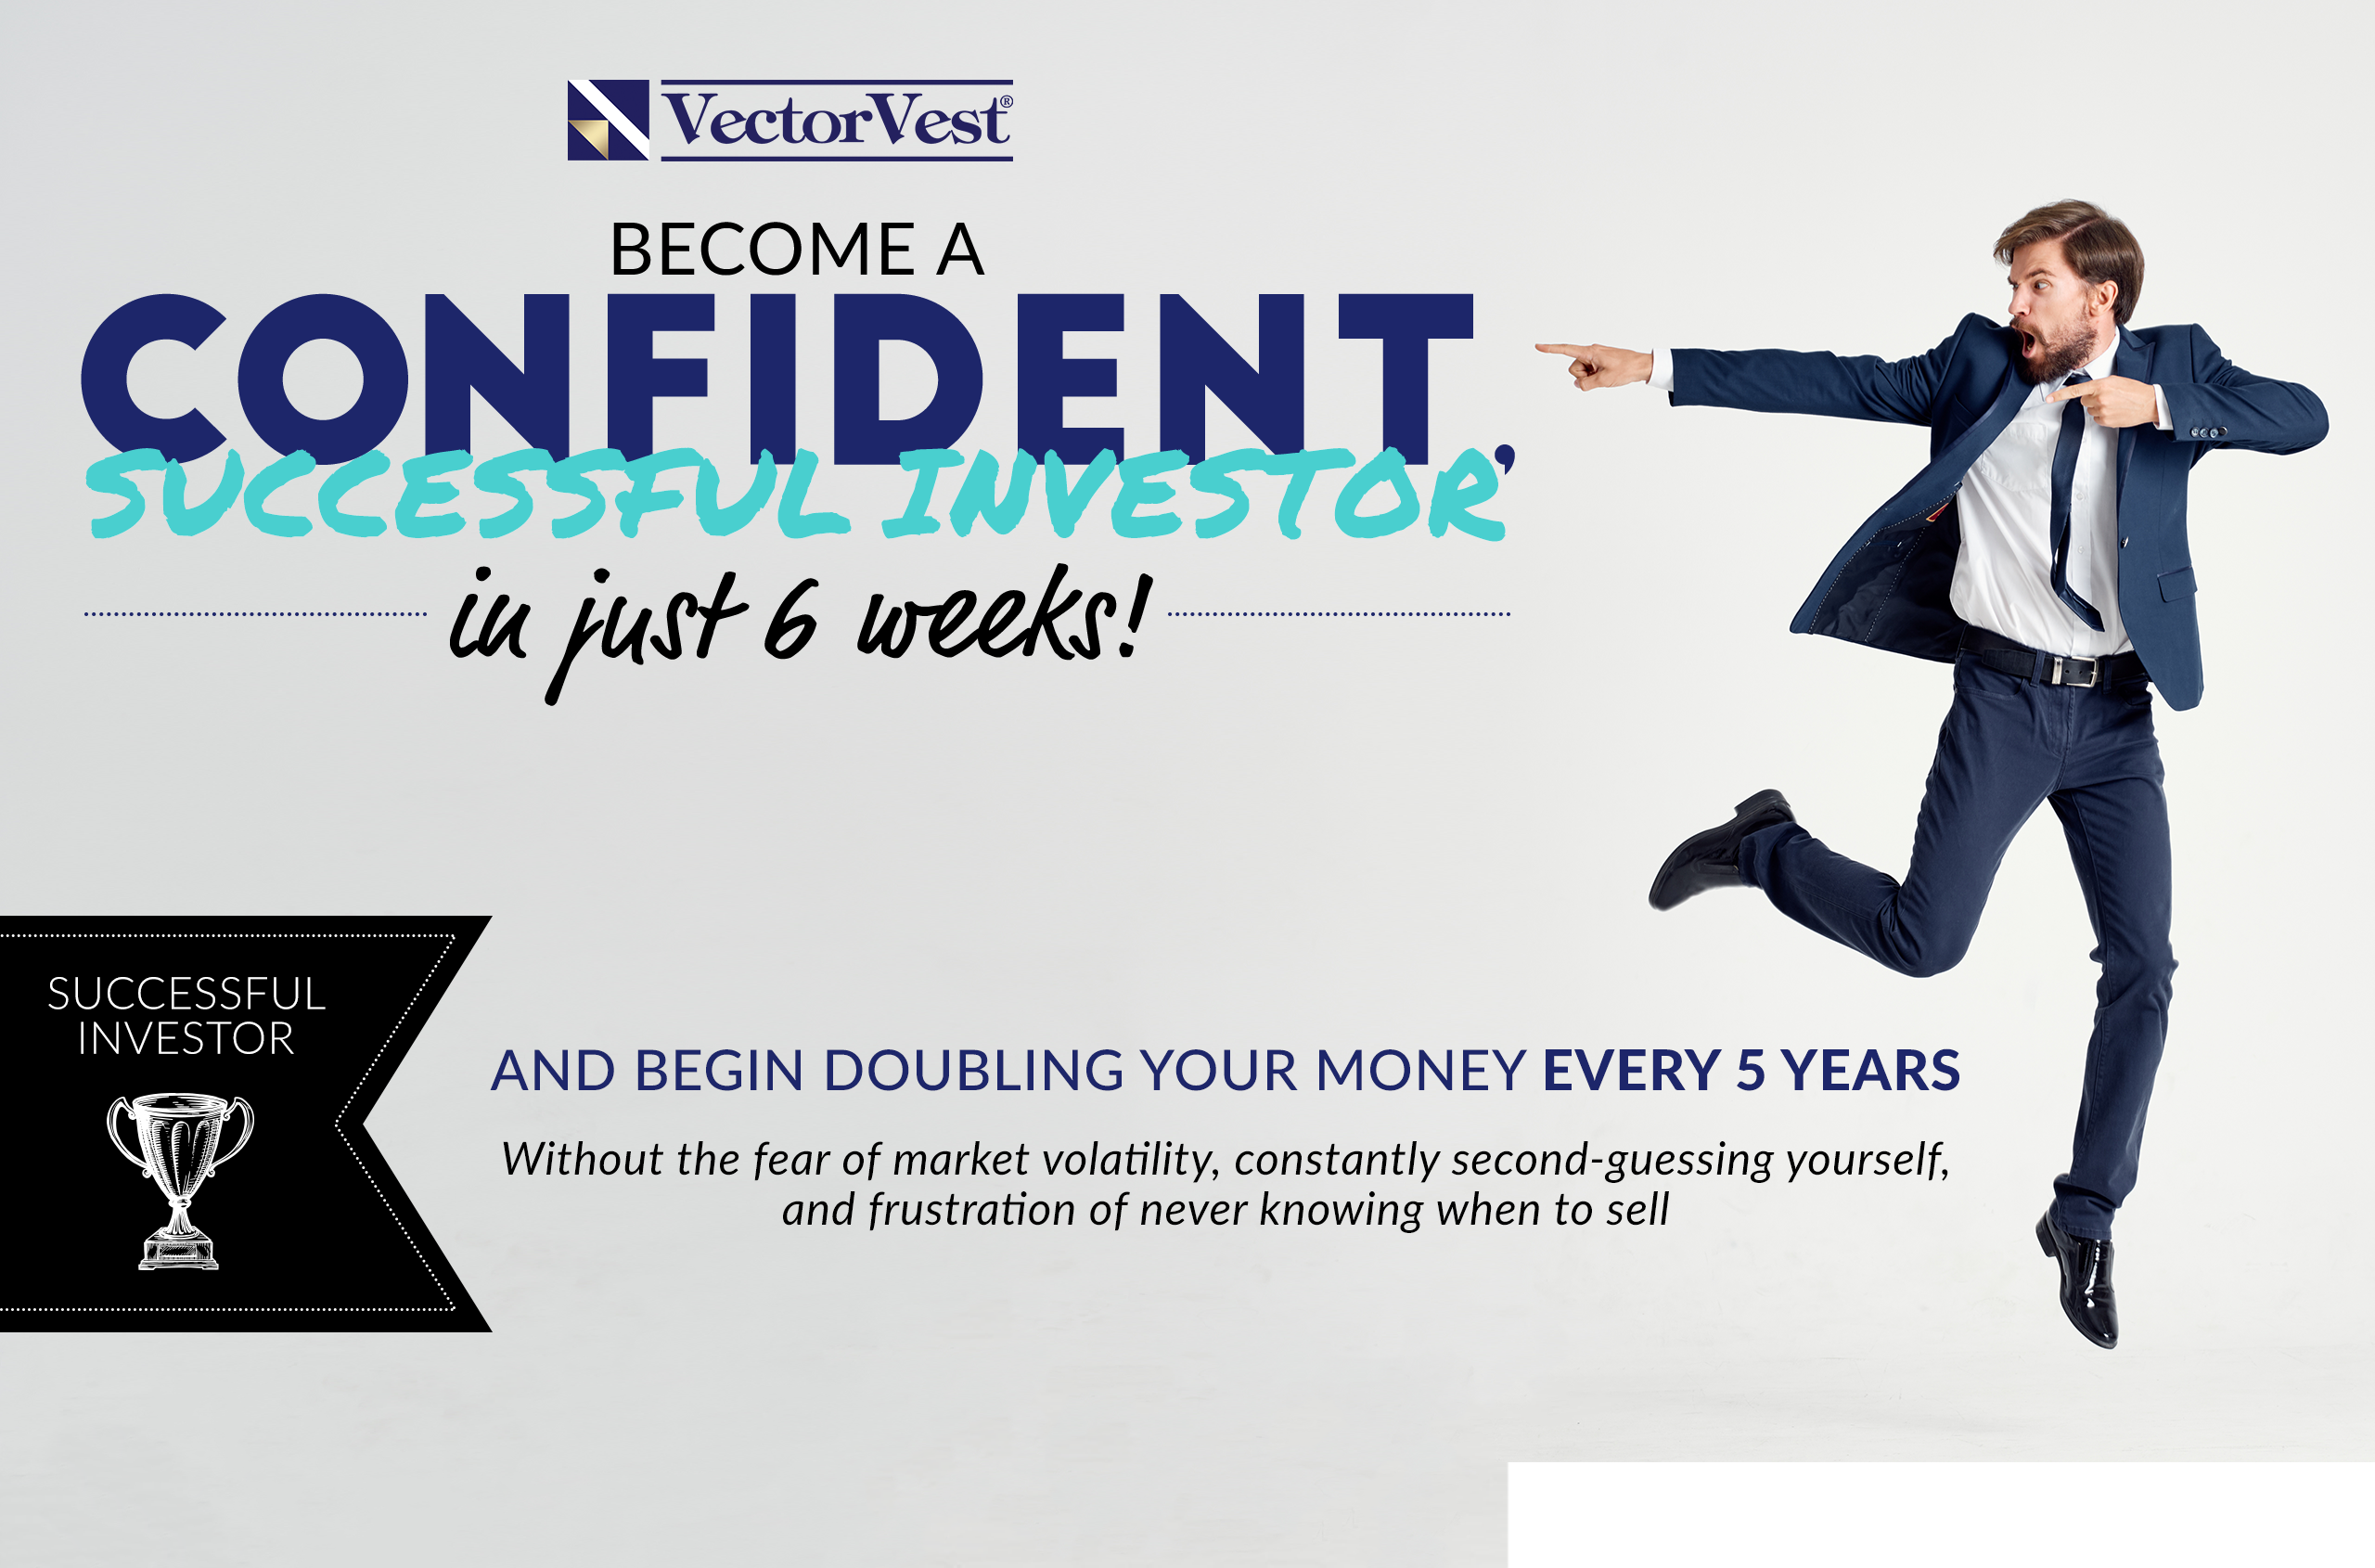 Become a Confident, Successful Investor in just 6 weeks!